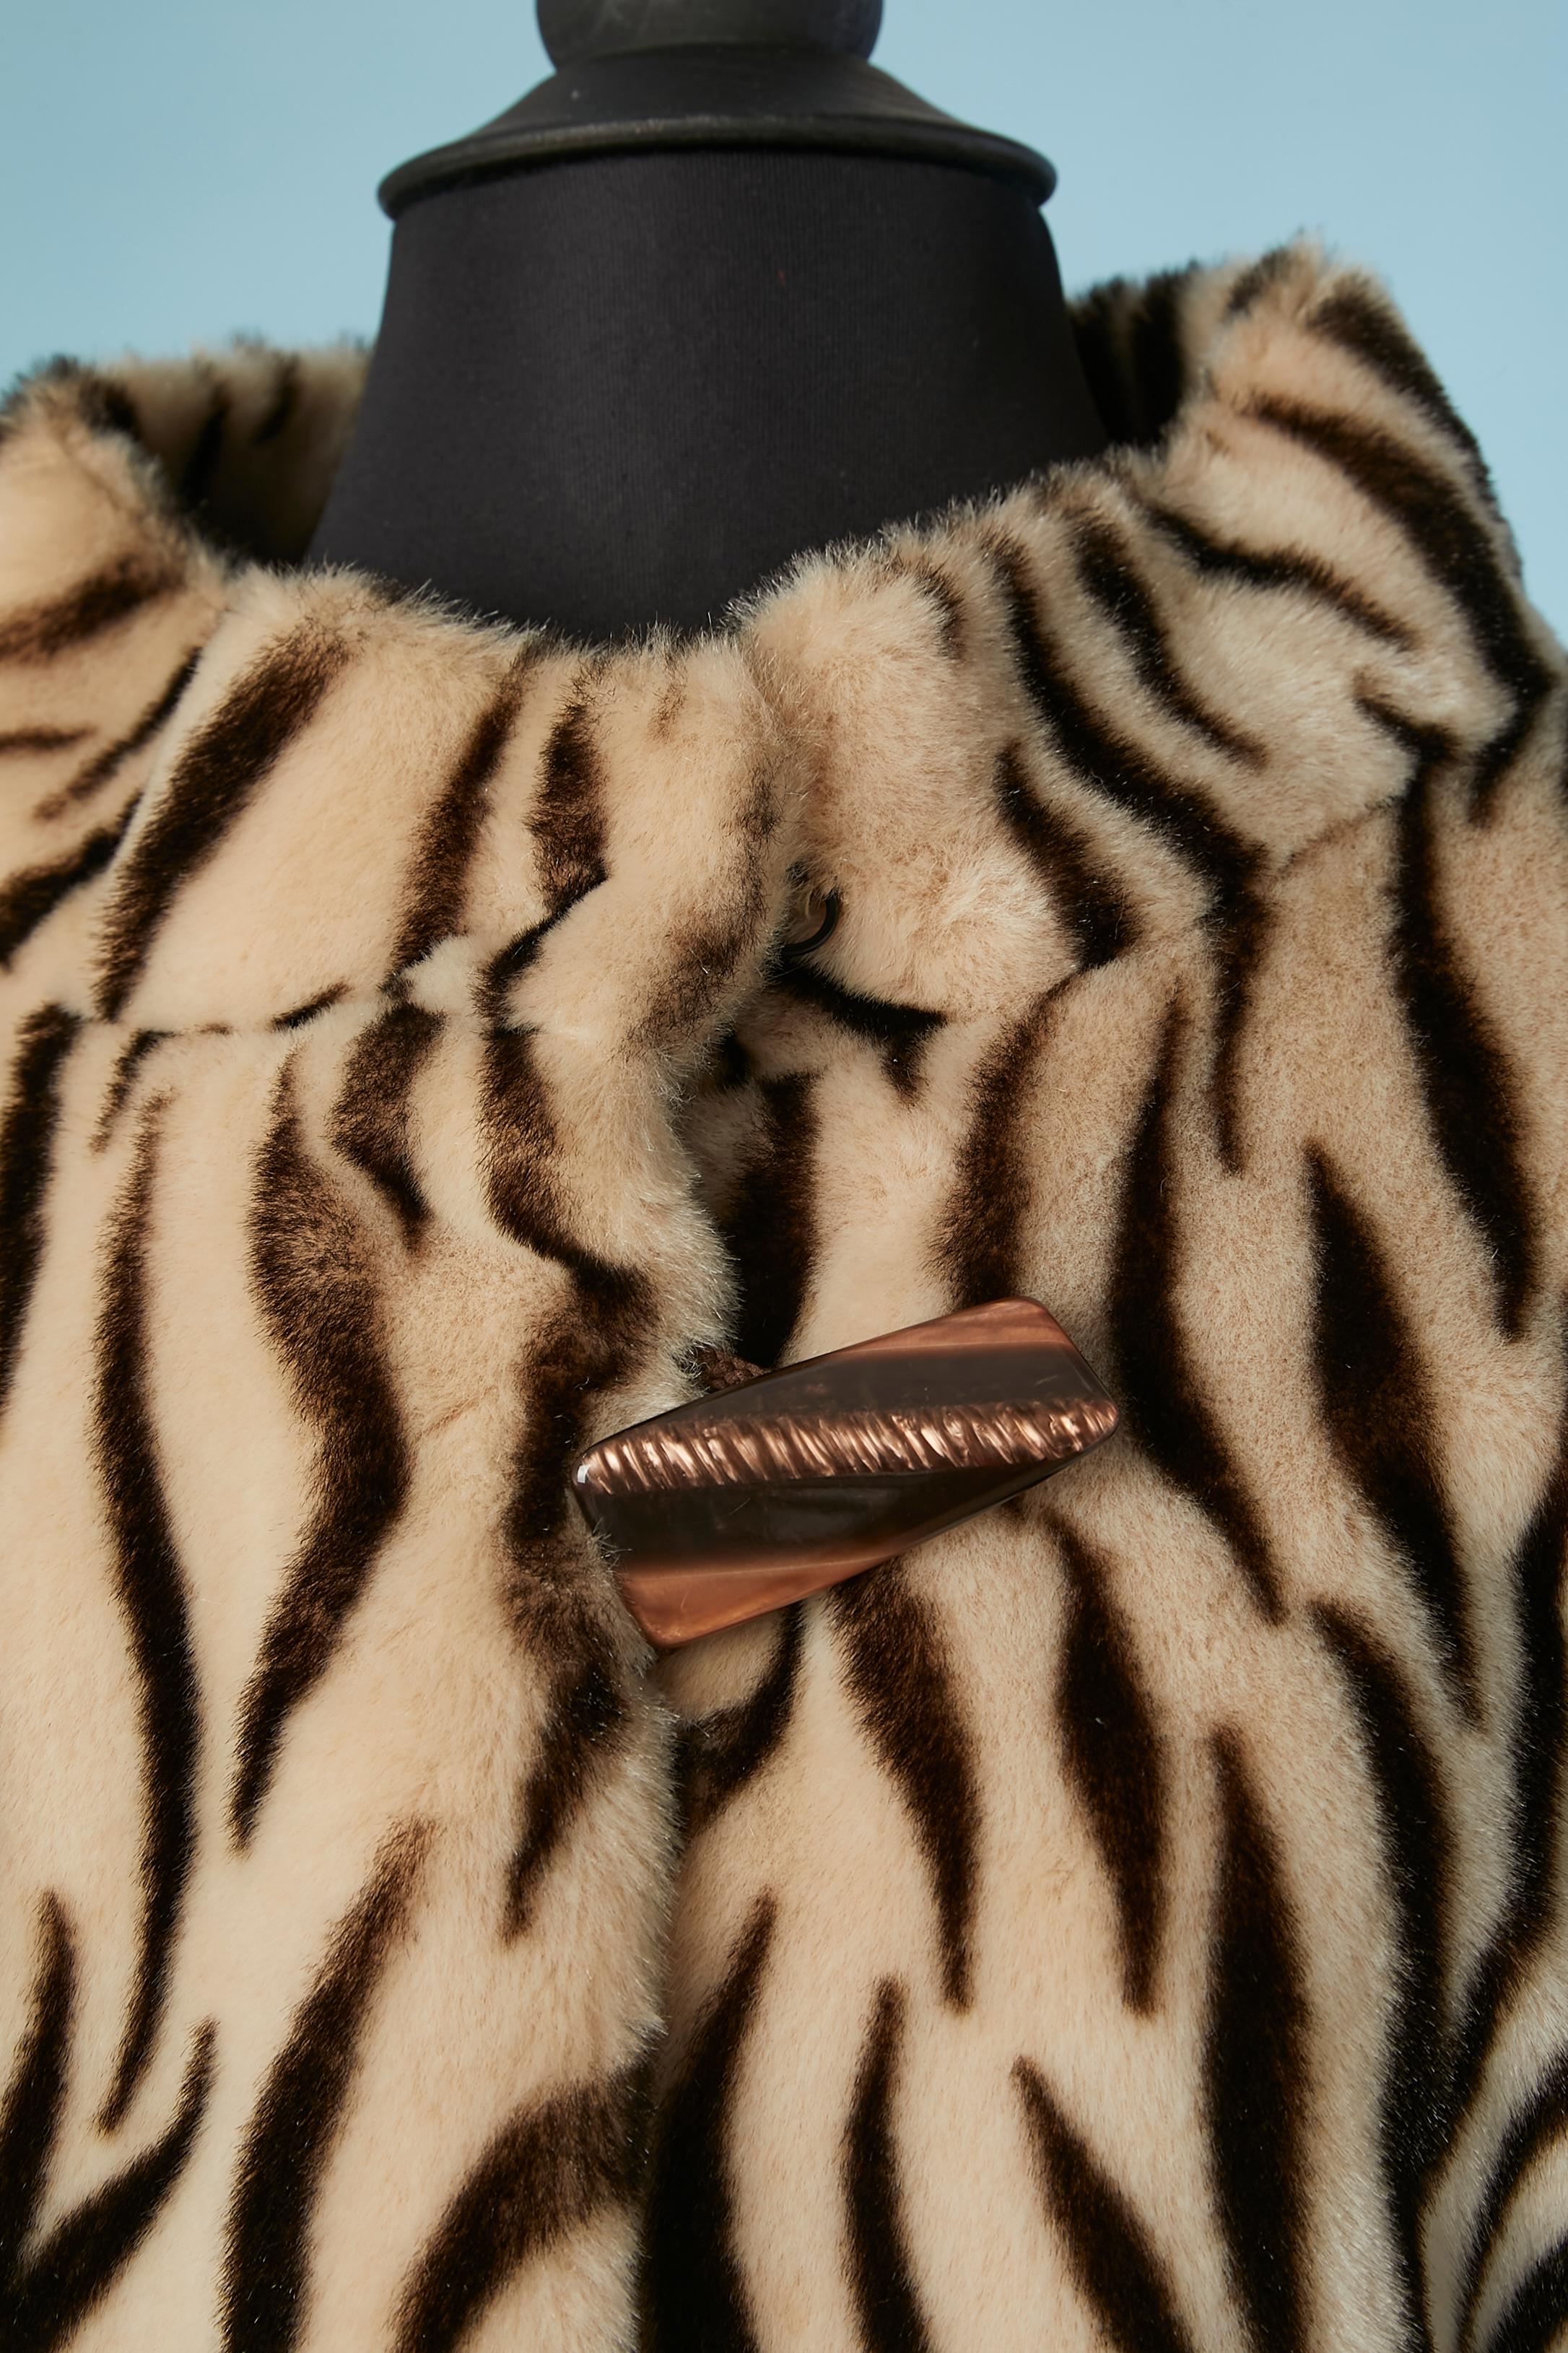 Fake fur cape with tiger print . Large resin button in the middle front. Rayon branded lining.
SIZE L